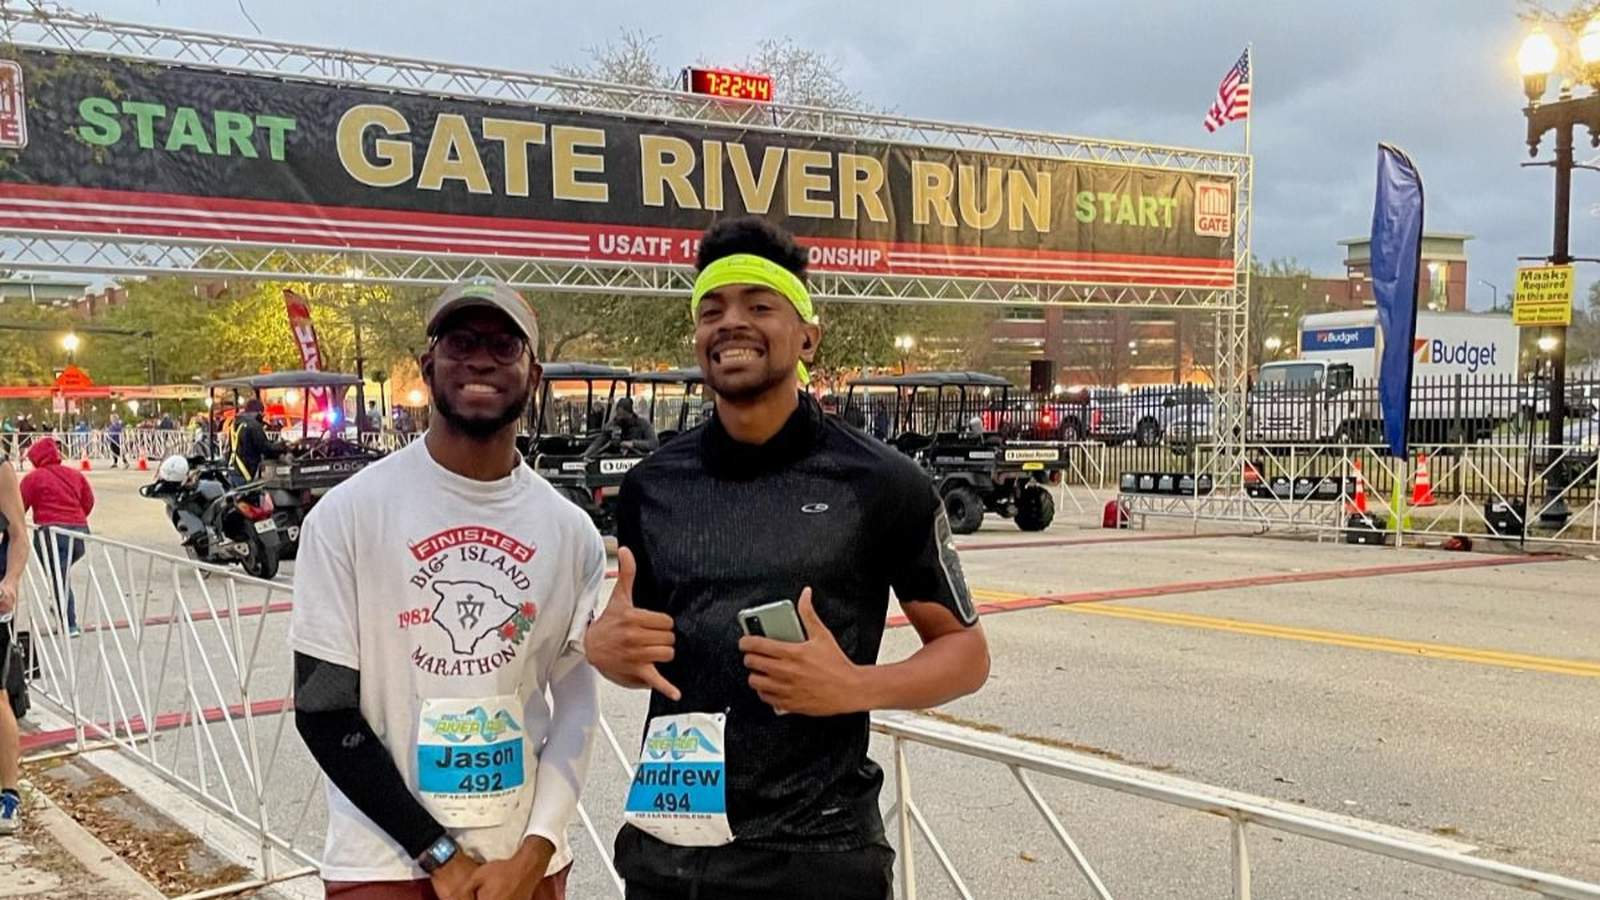 Gate River Run athlete in intensive care after collapsing at finish line